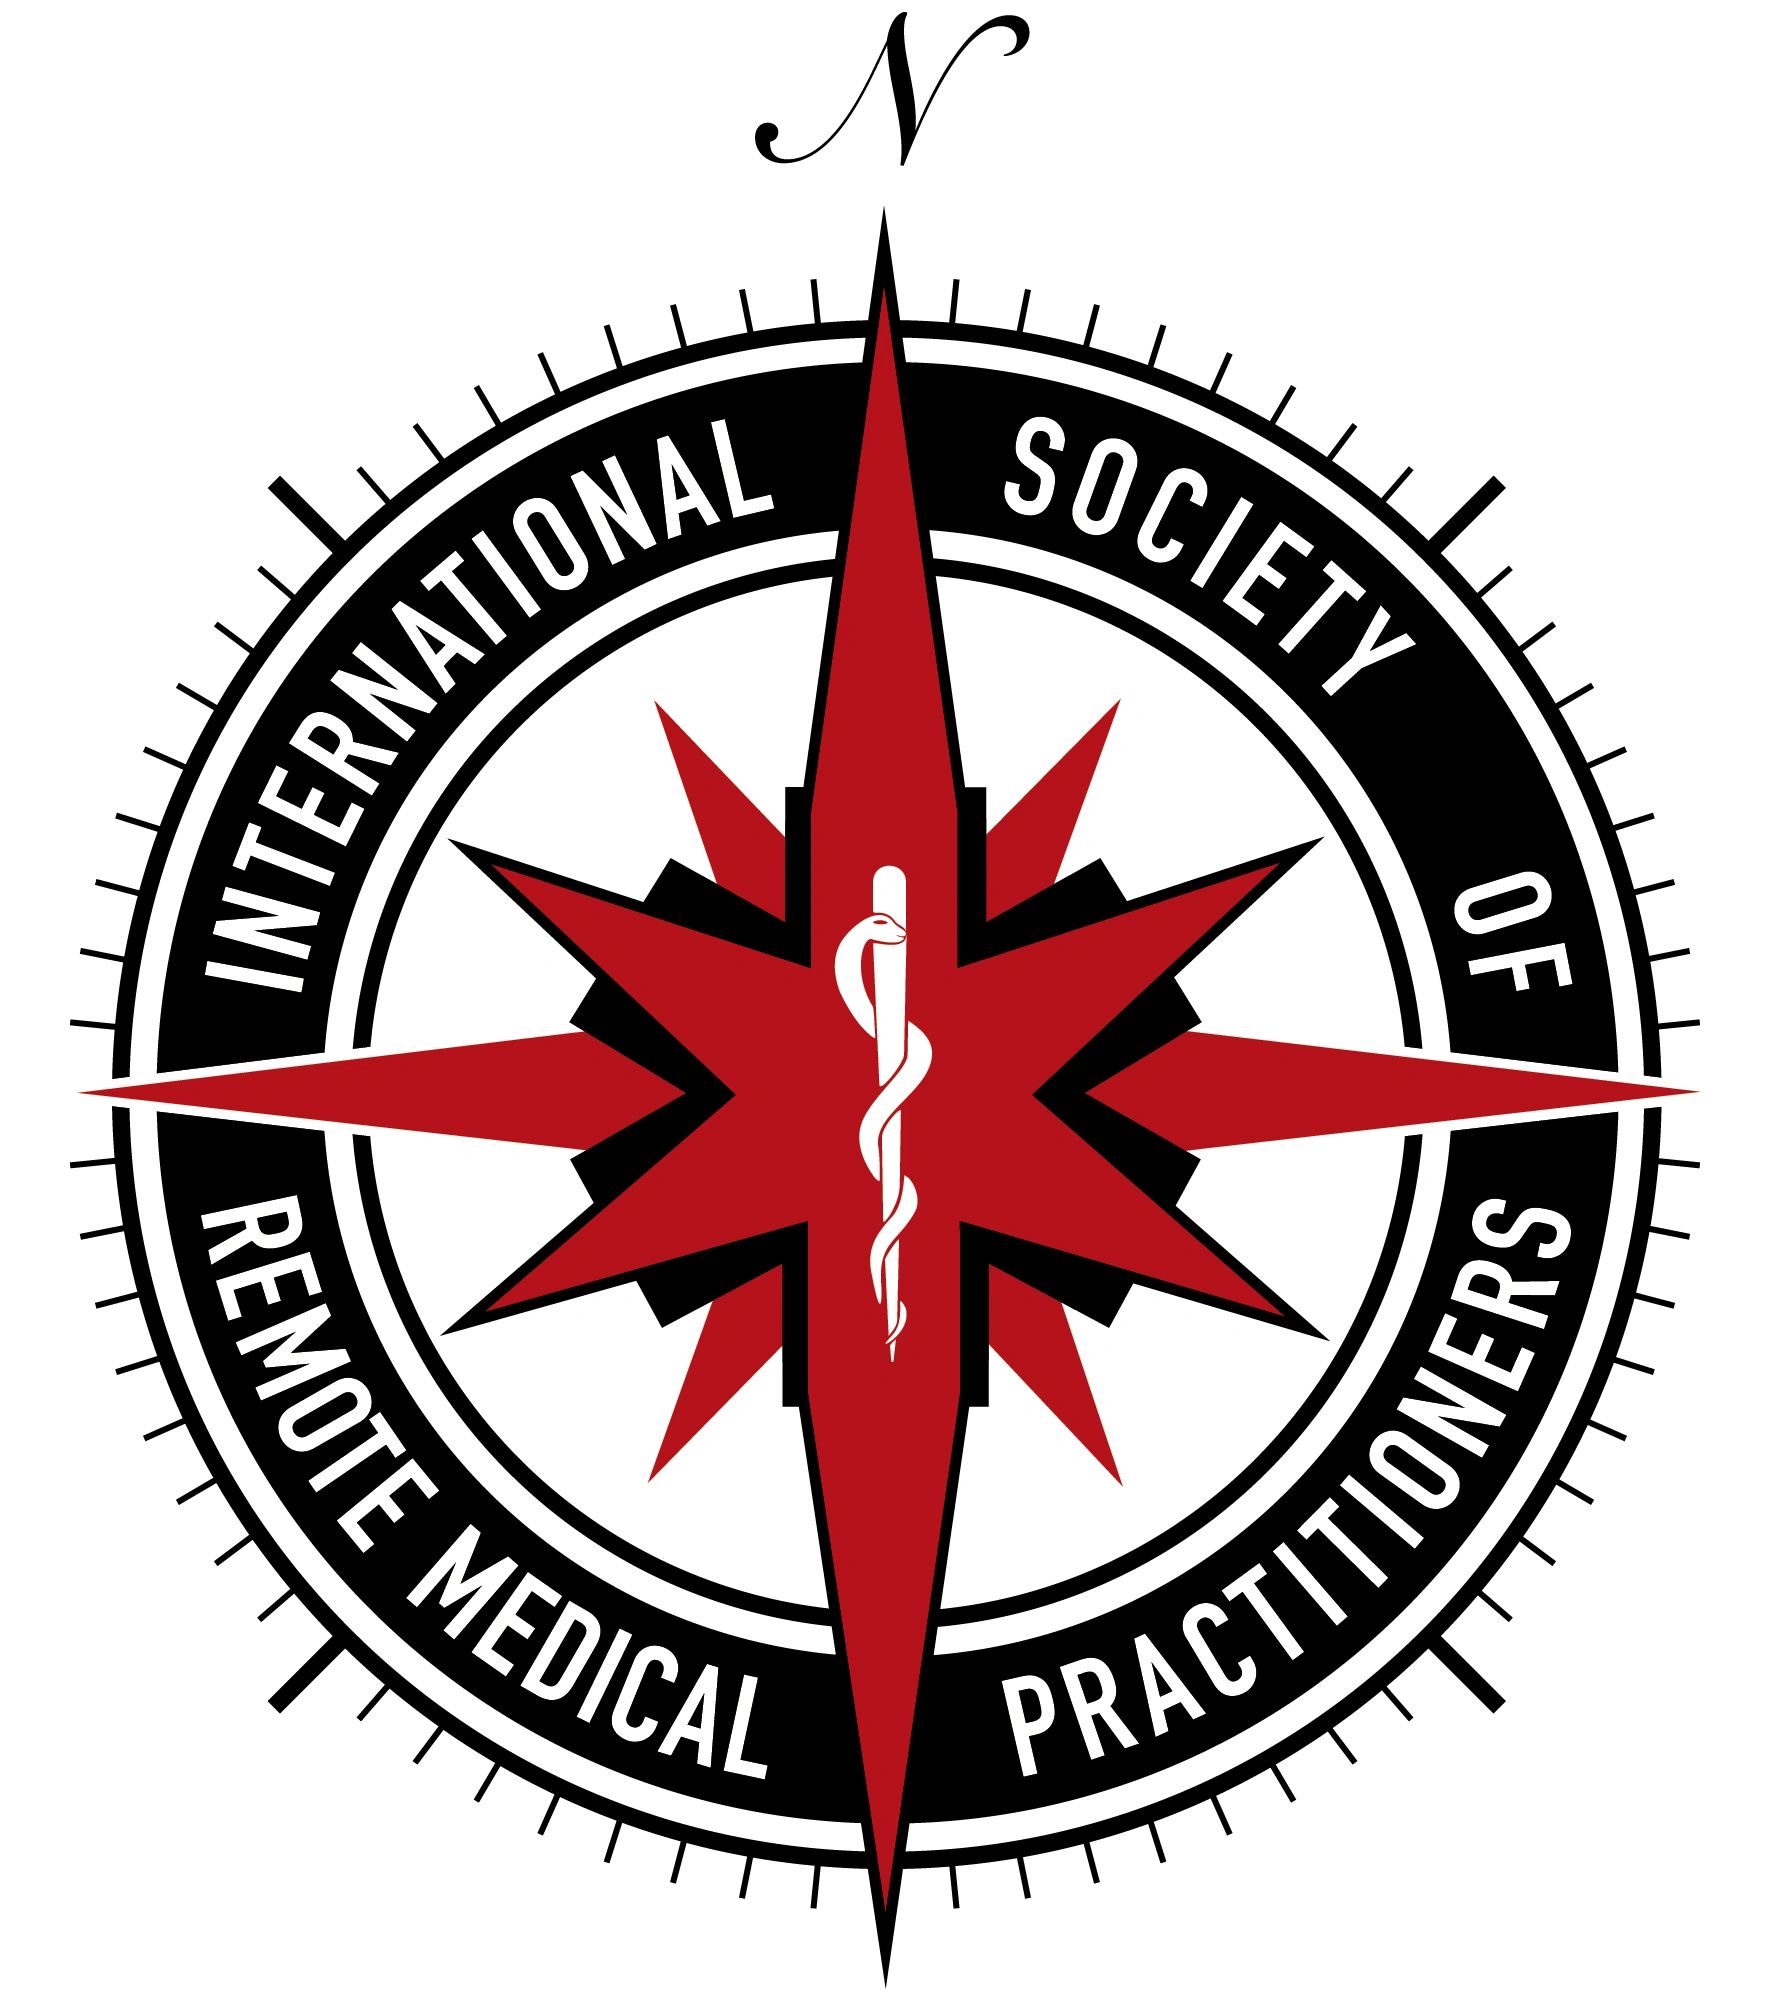 International Society of Remote Medical Practitioners